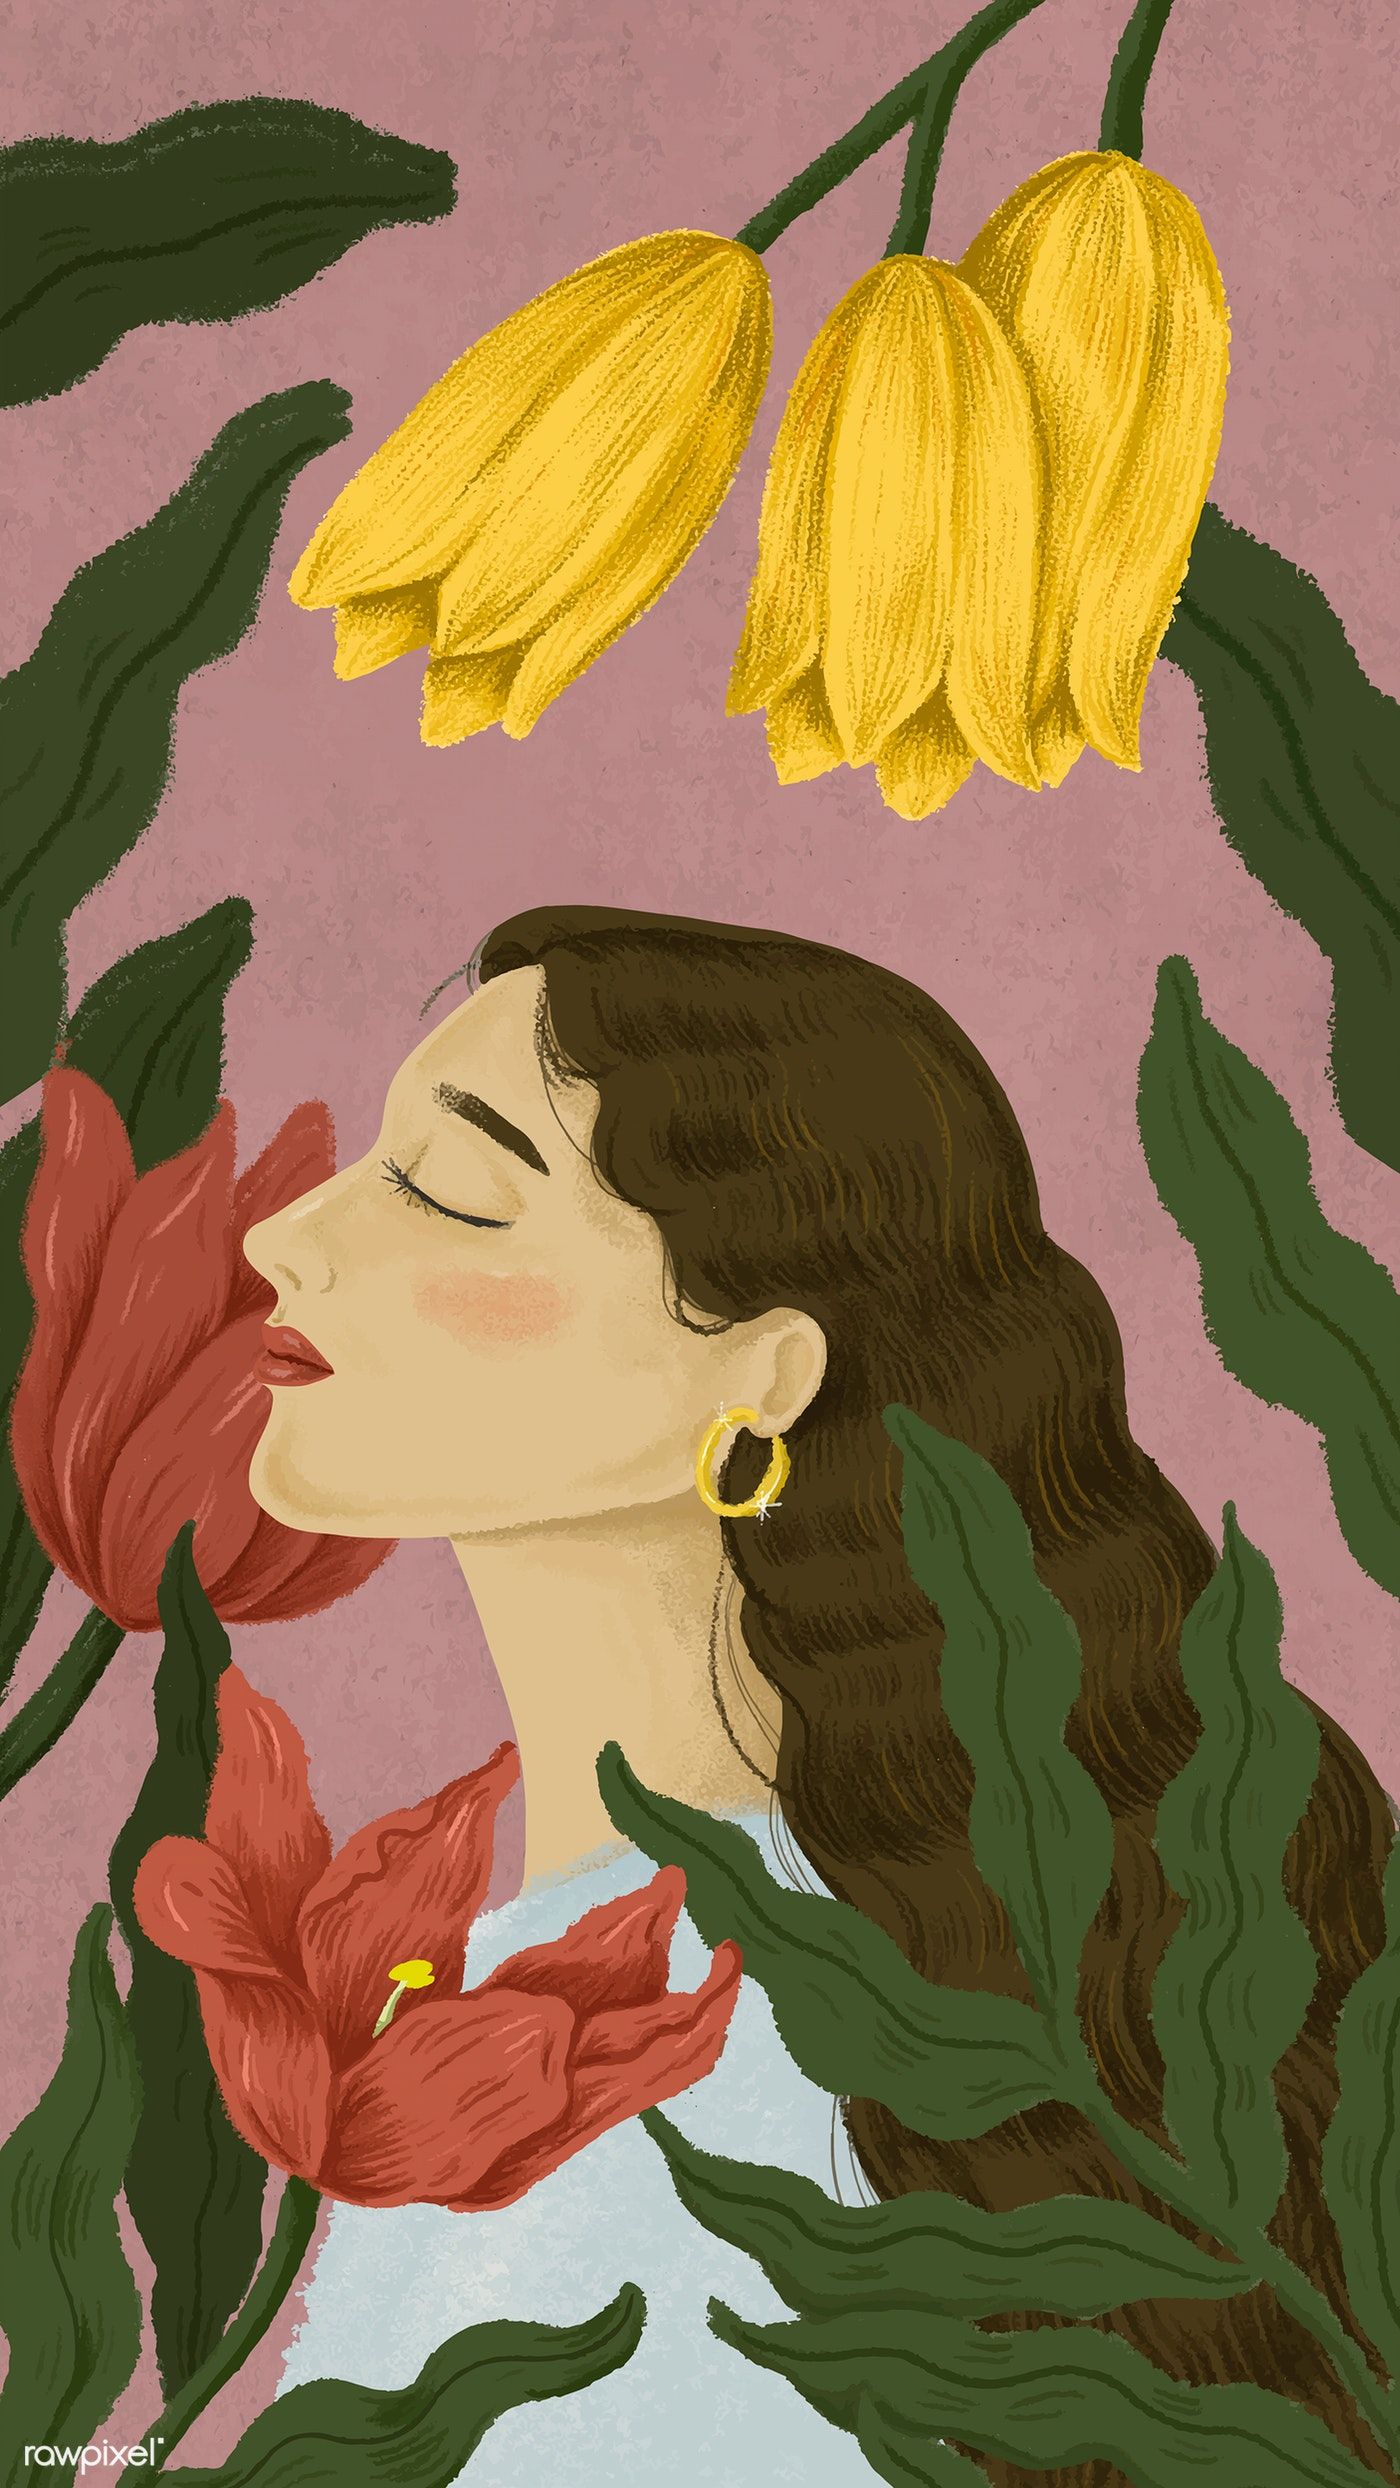 Download premium vector of Beautiful woman surrounded by nature illustration by Noon about woman art green background yellow wallpaper and mexican art 1220711